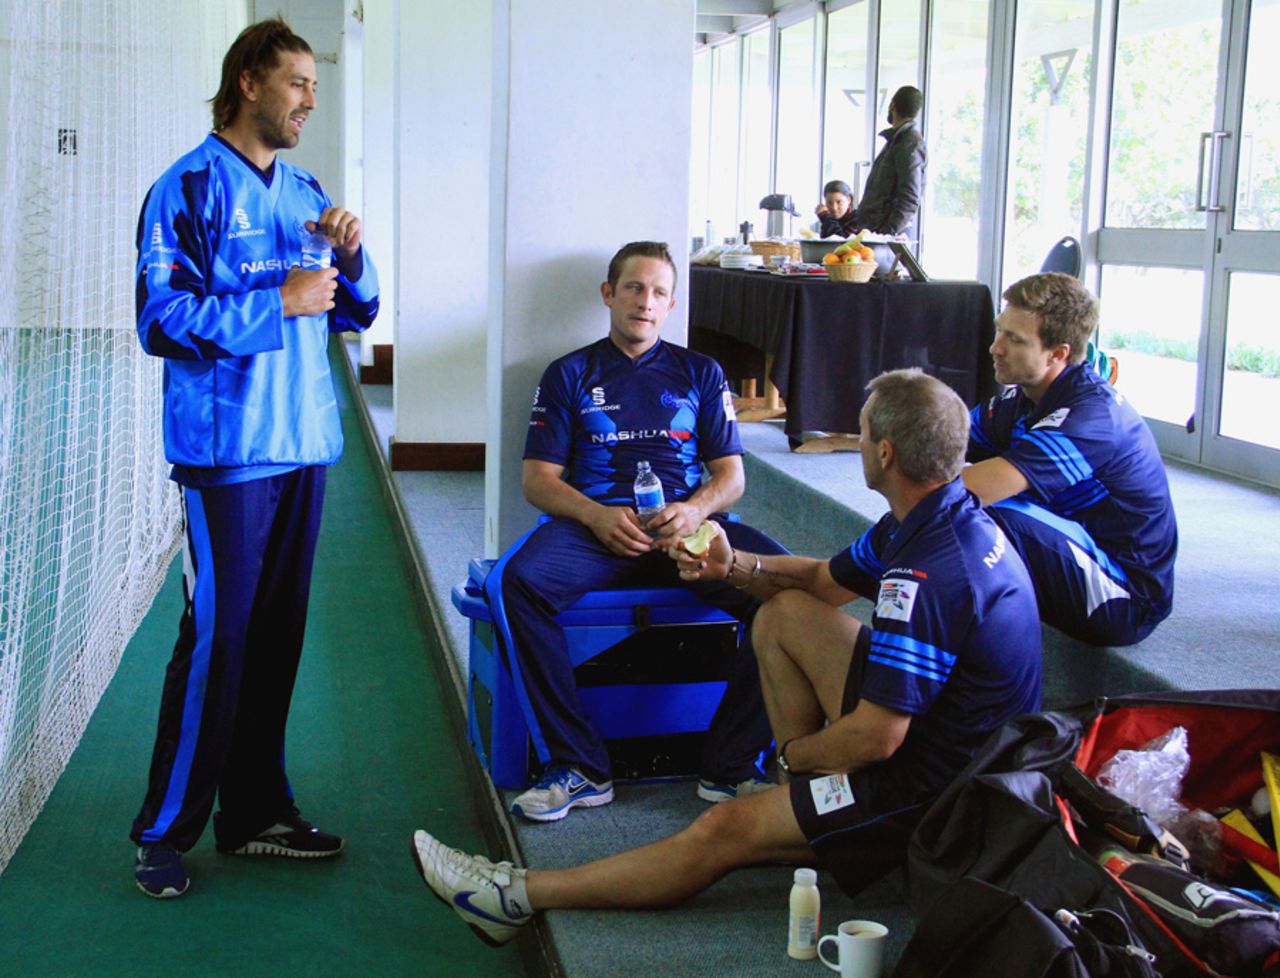 David Wiese (standing) talks to his team-mates and coach (sitting, right) during training, Cape Town, October 19, 2012